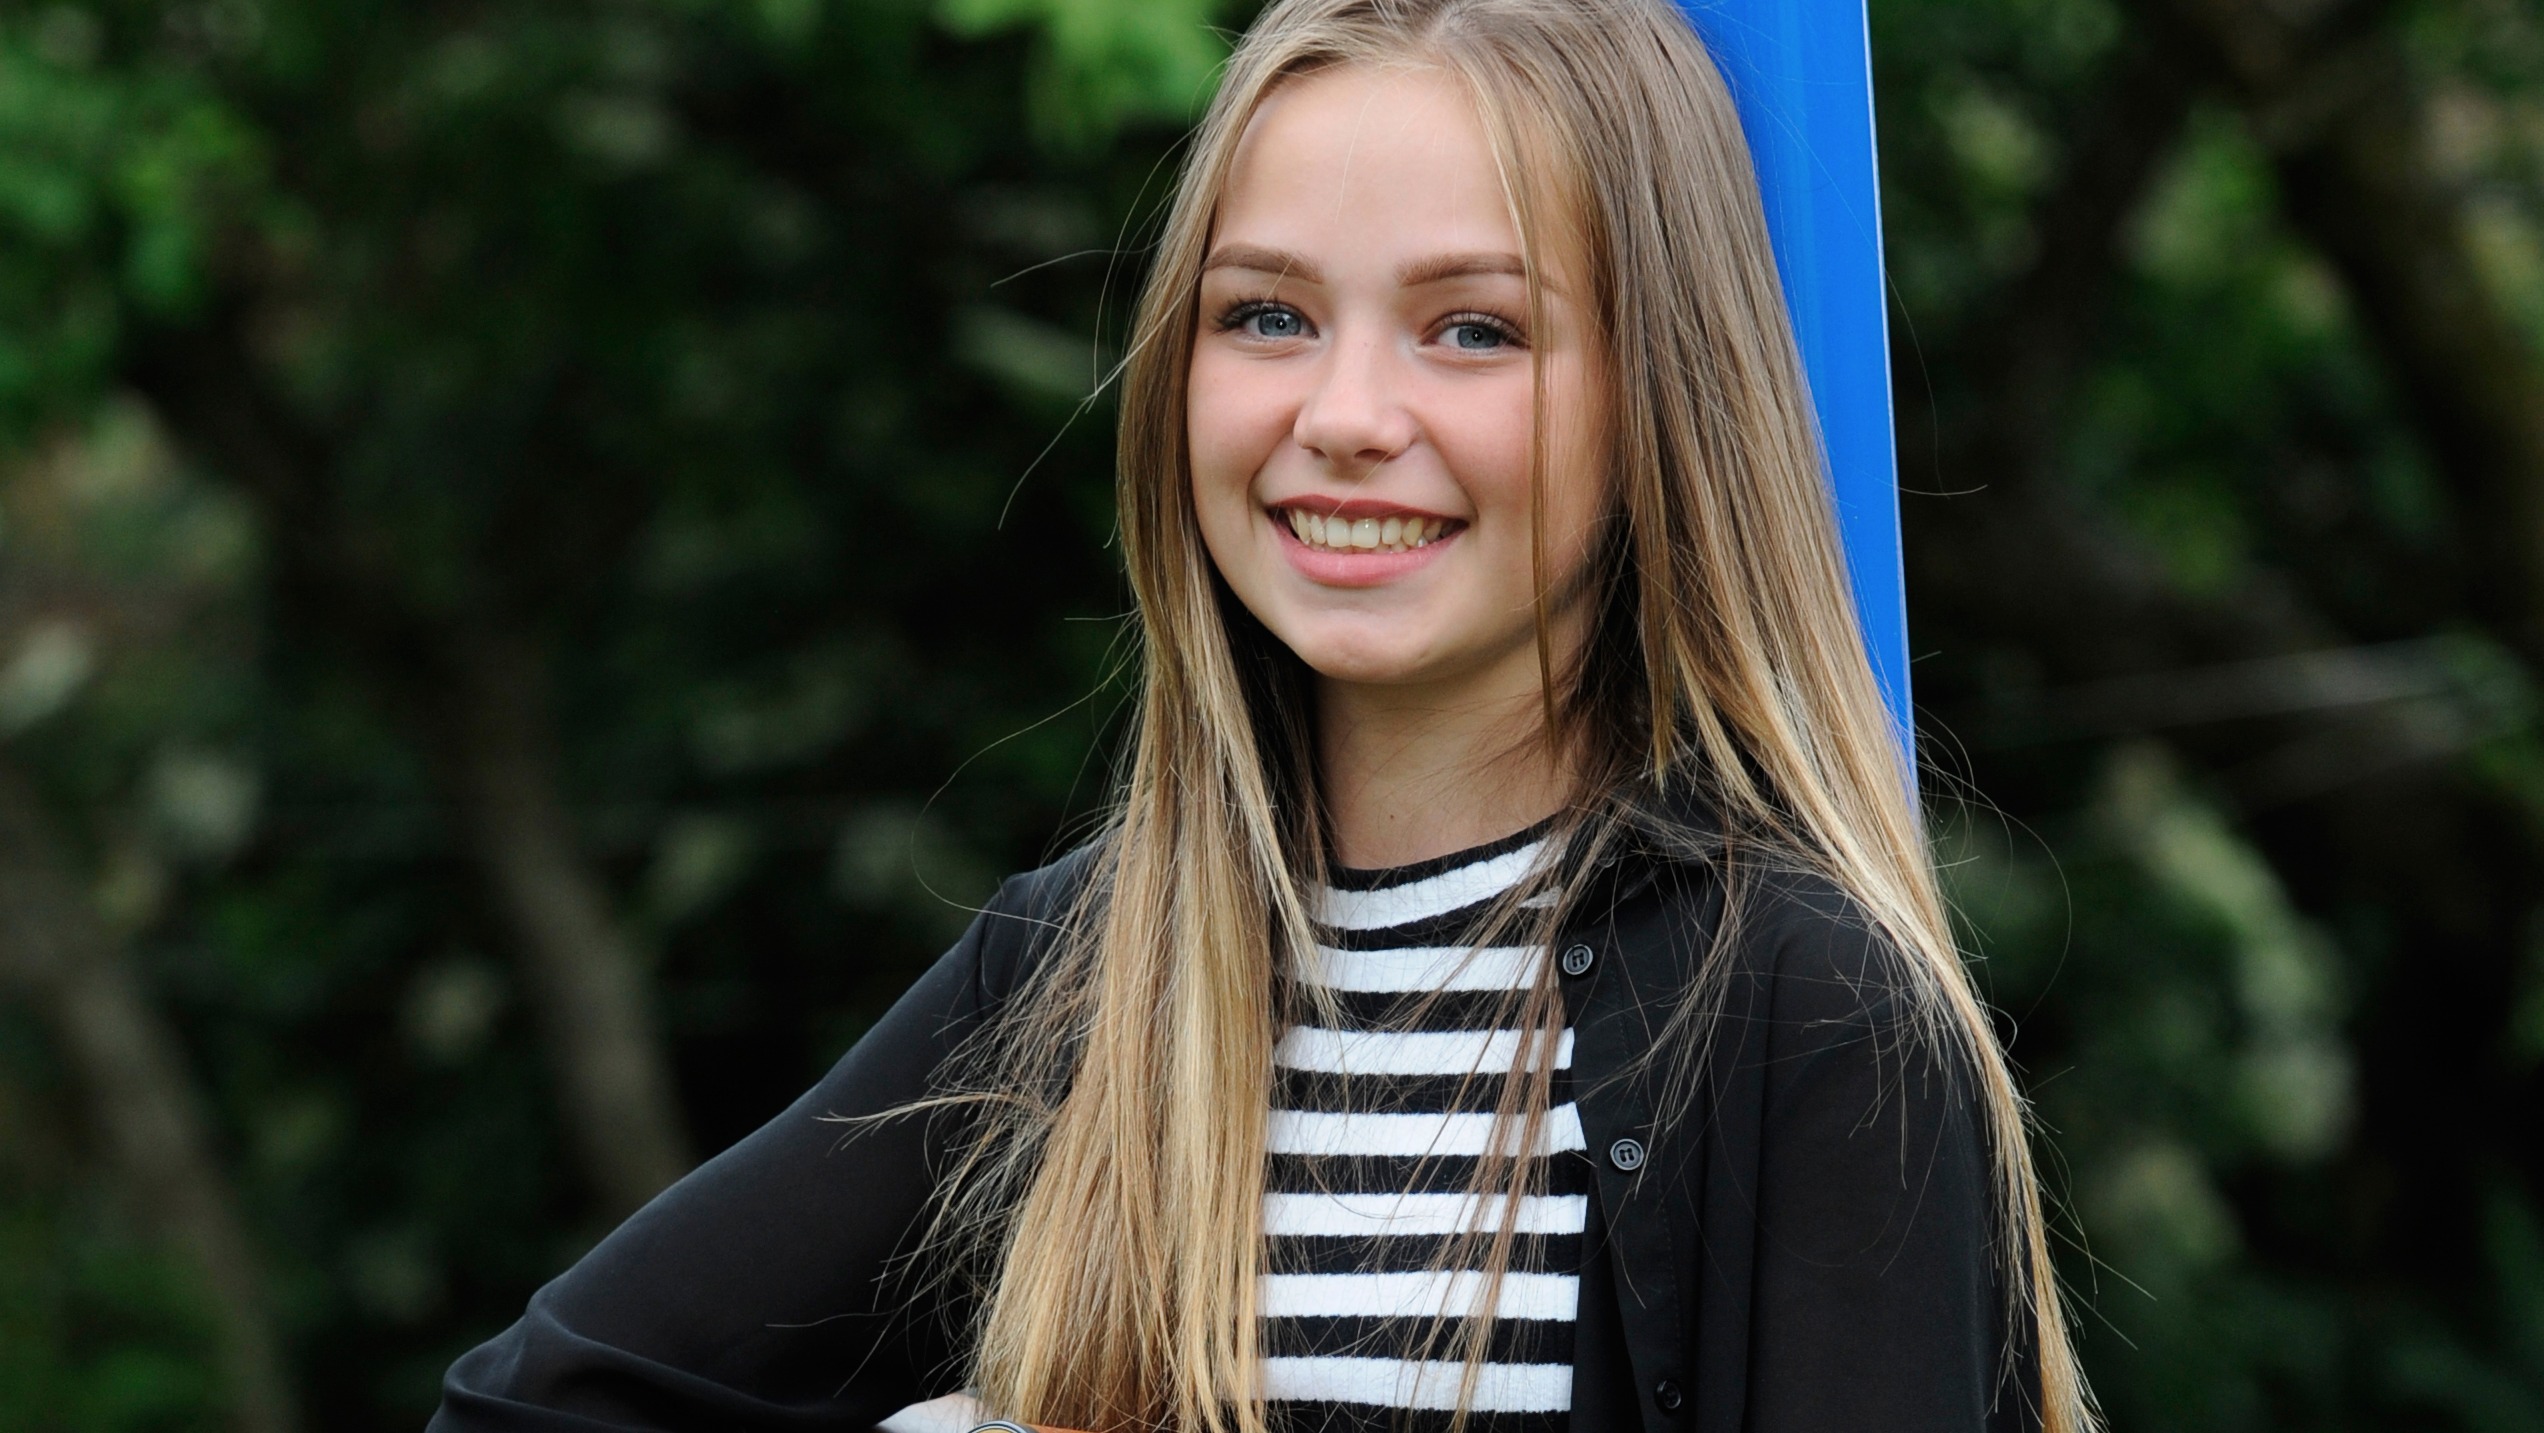 14-year-old Connie Talbot collaborates with Hollywood song-writer